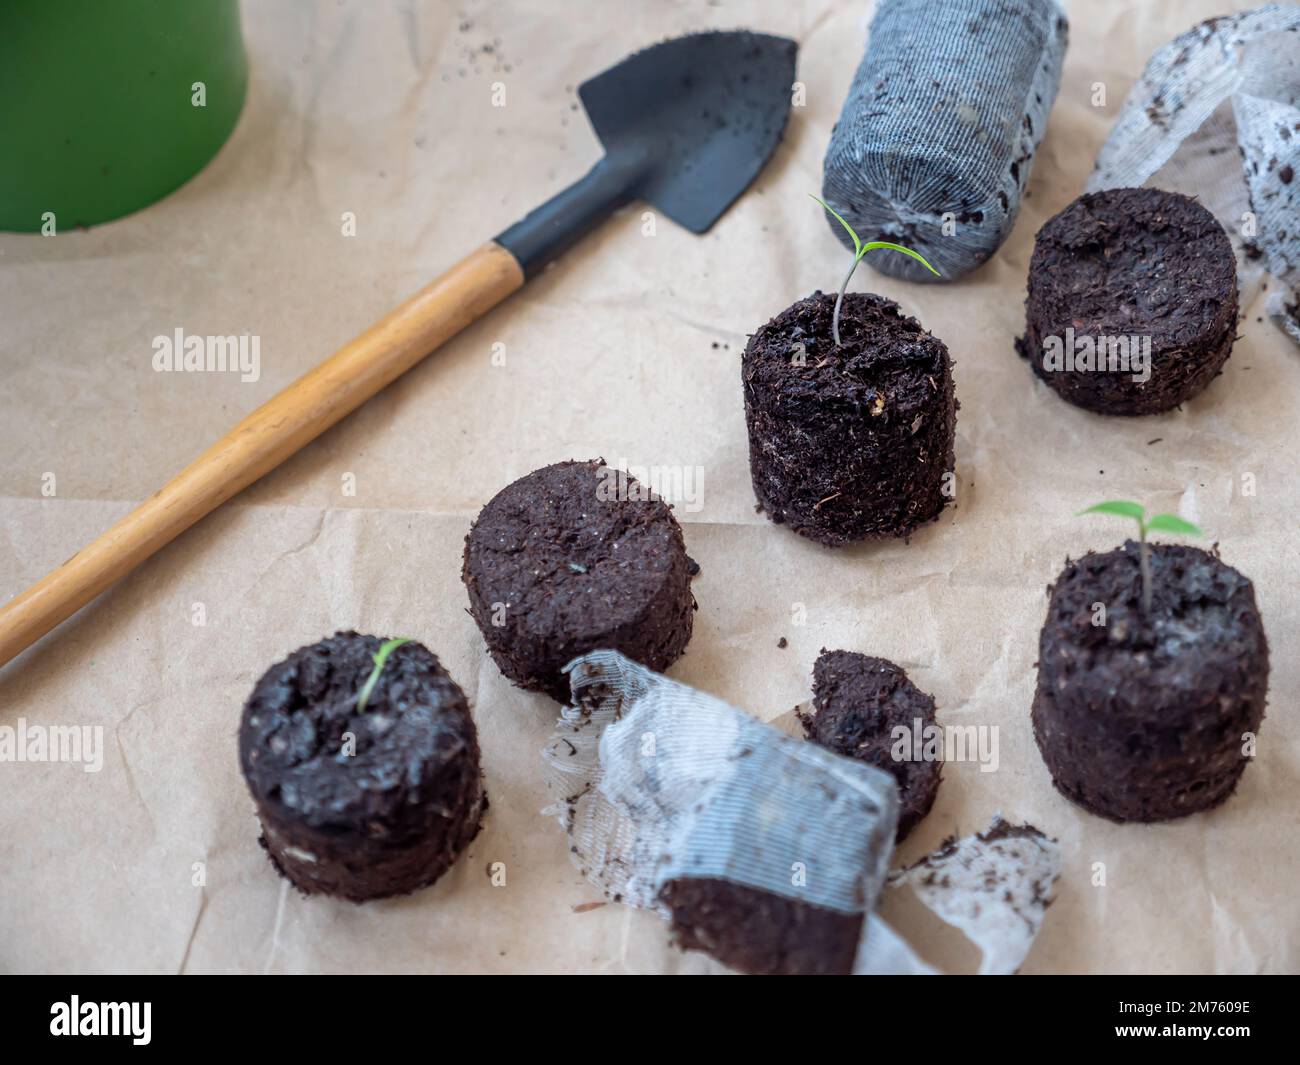 Tomato seedlings growing in swollen peat tablets scattered on a rough brown paper. A shovel and a pot nearby. Stock Photo